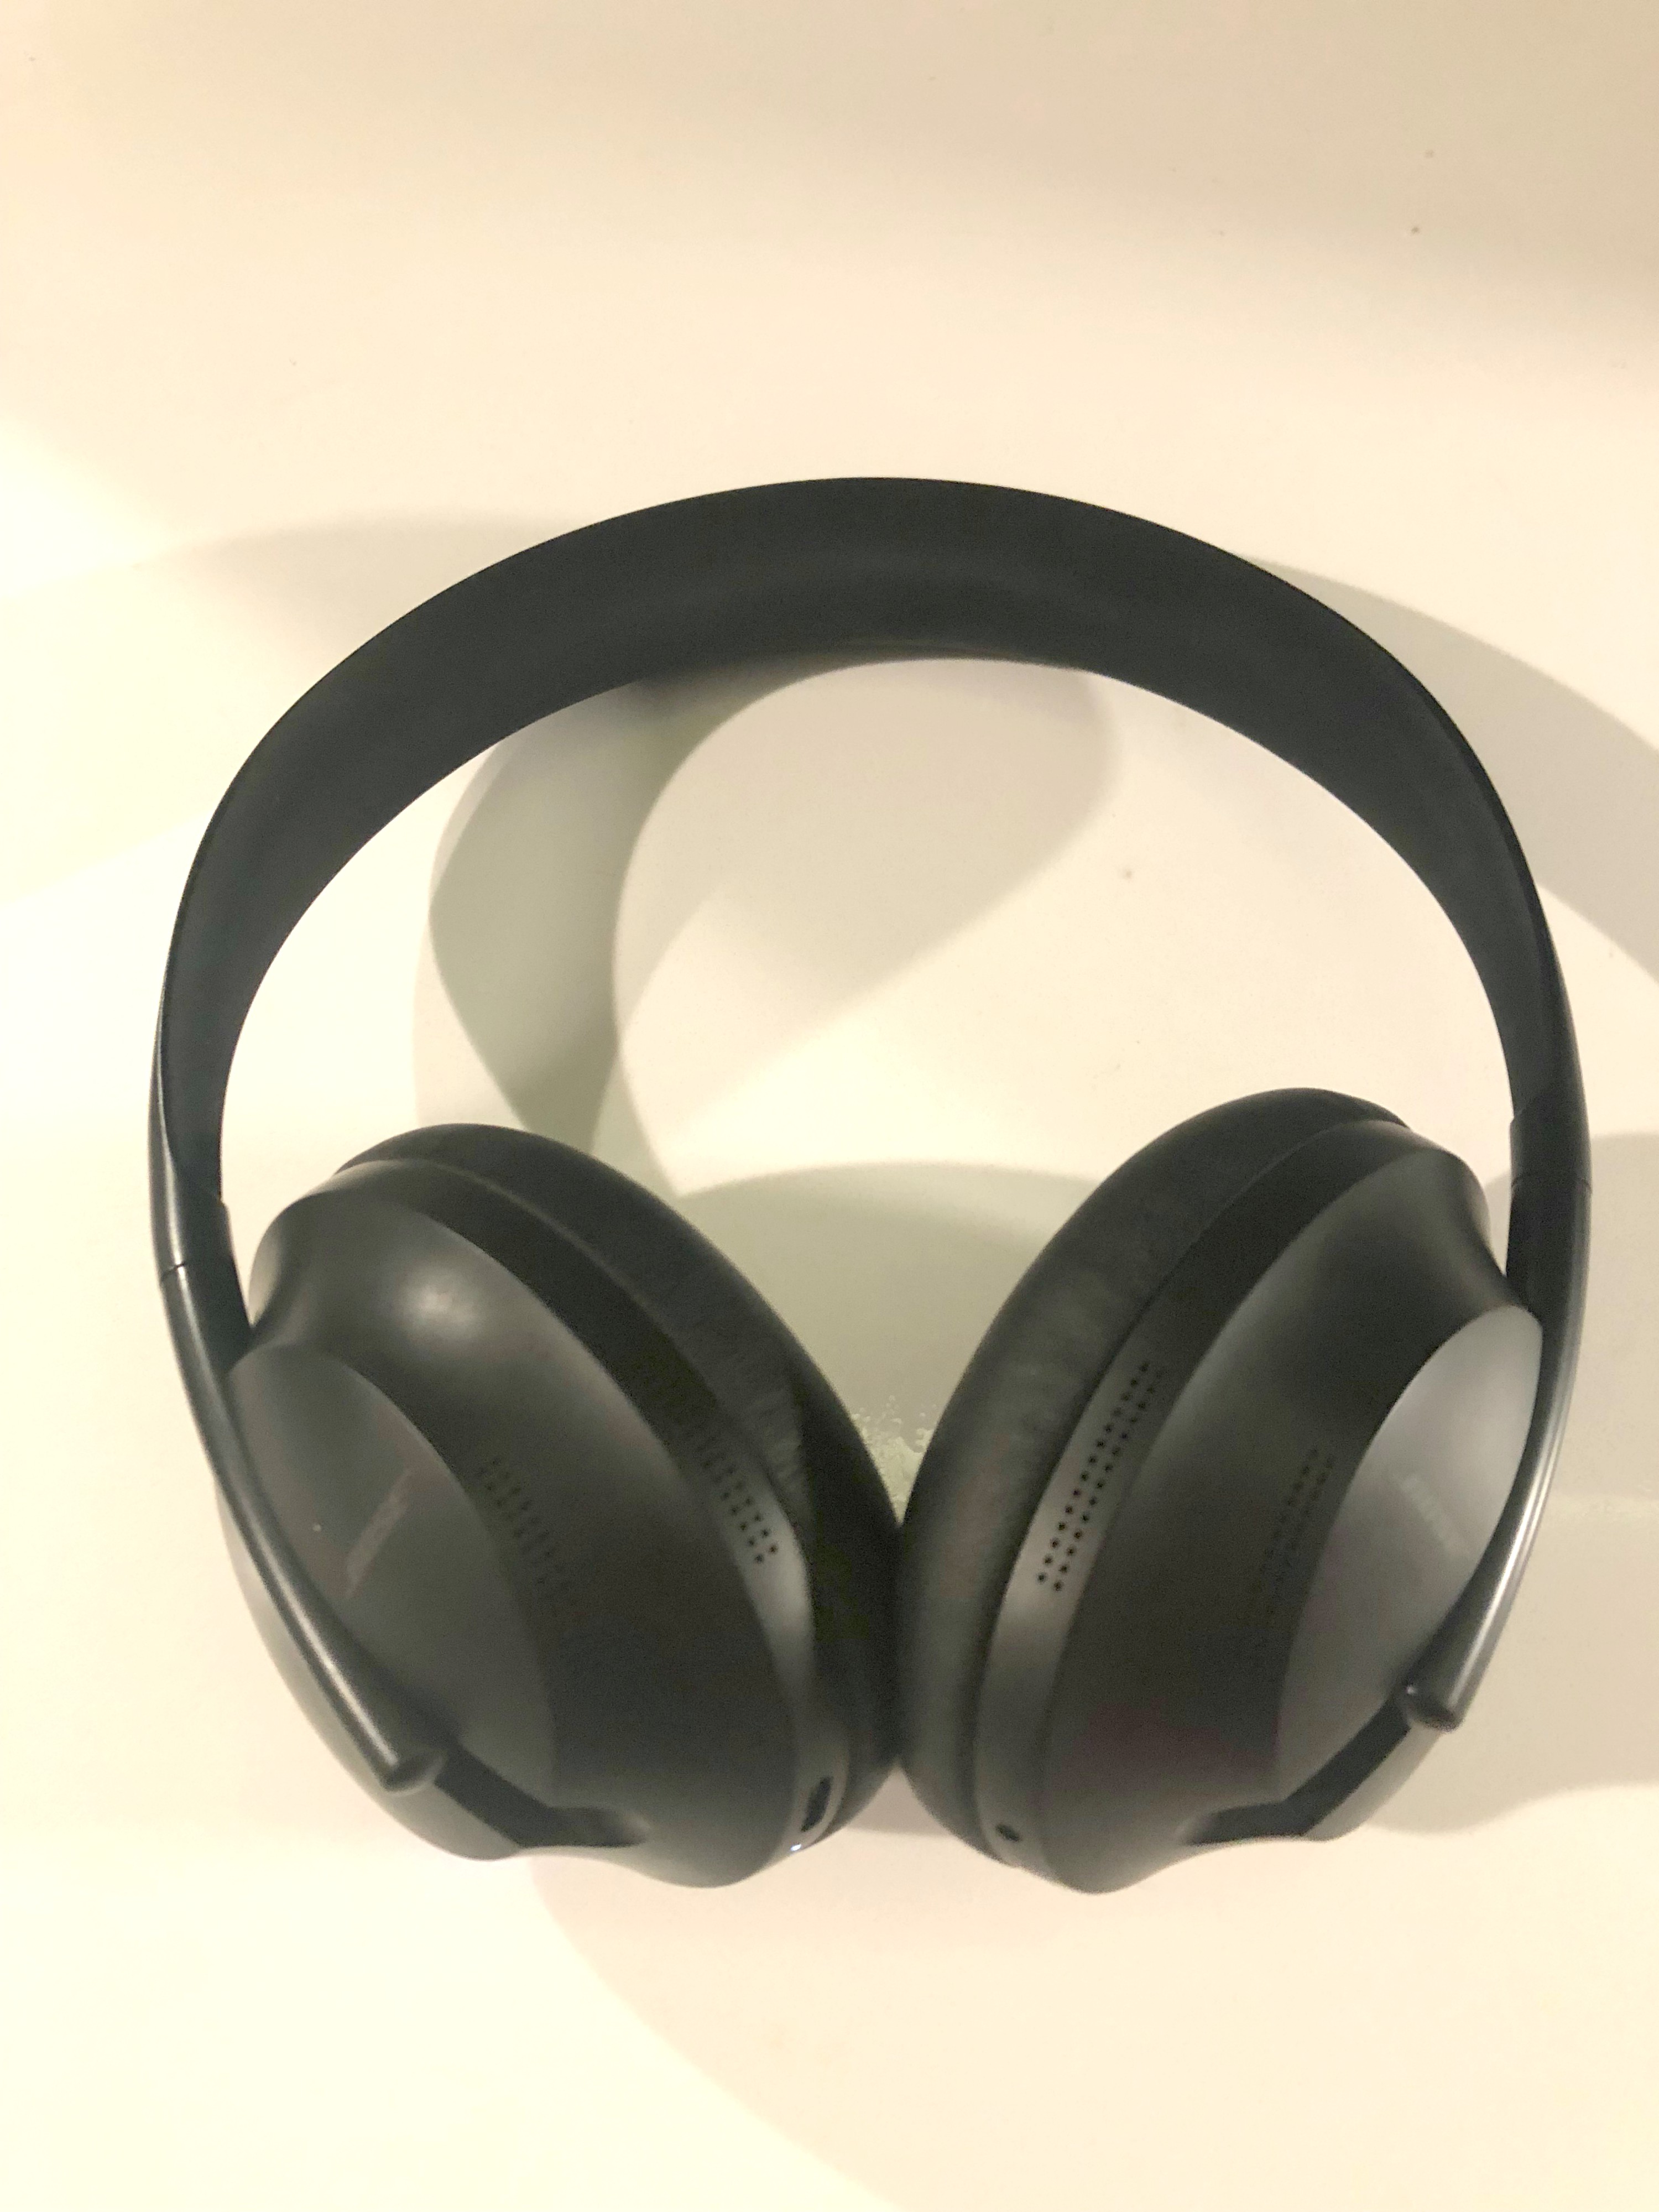 Love a Great Wireless Music Experience? Look into Bose Noise Cancelling Headphones 700